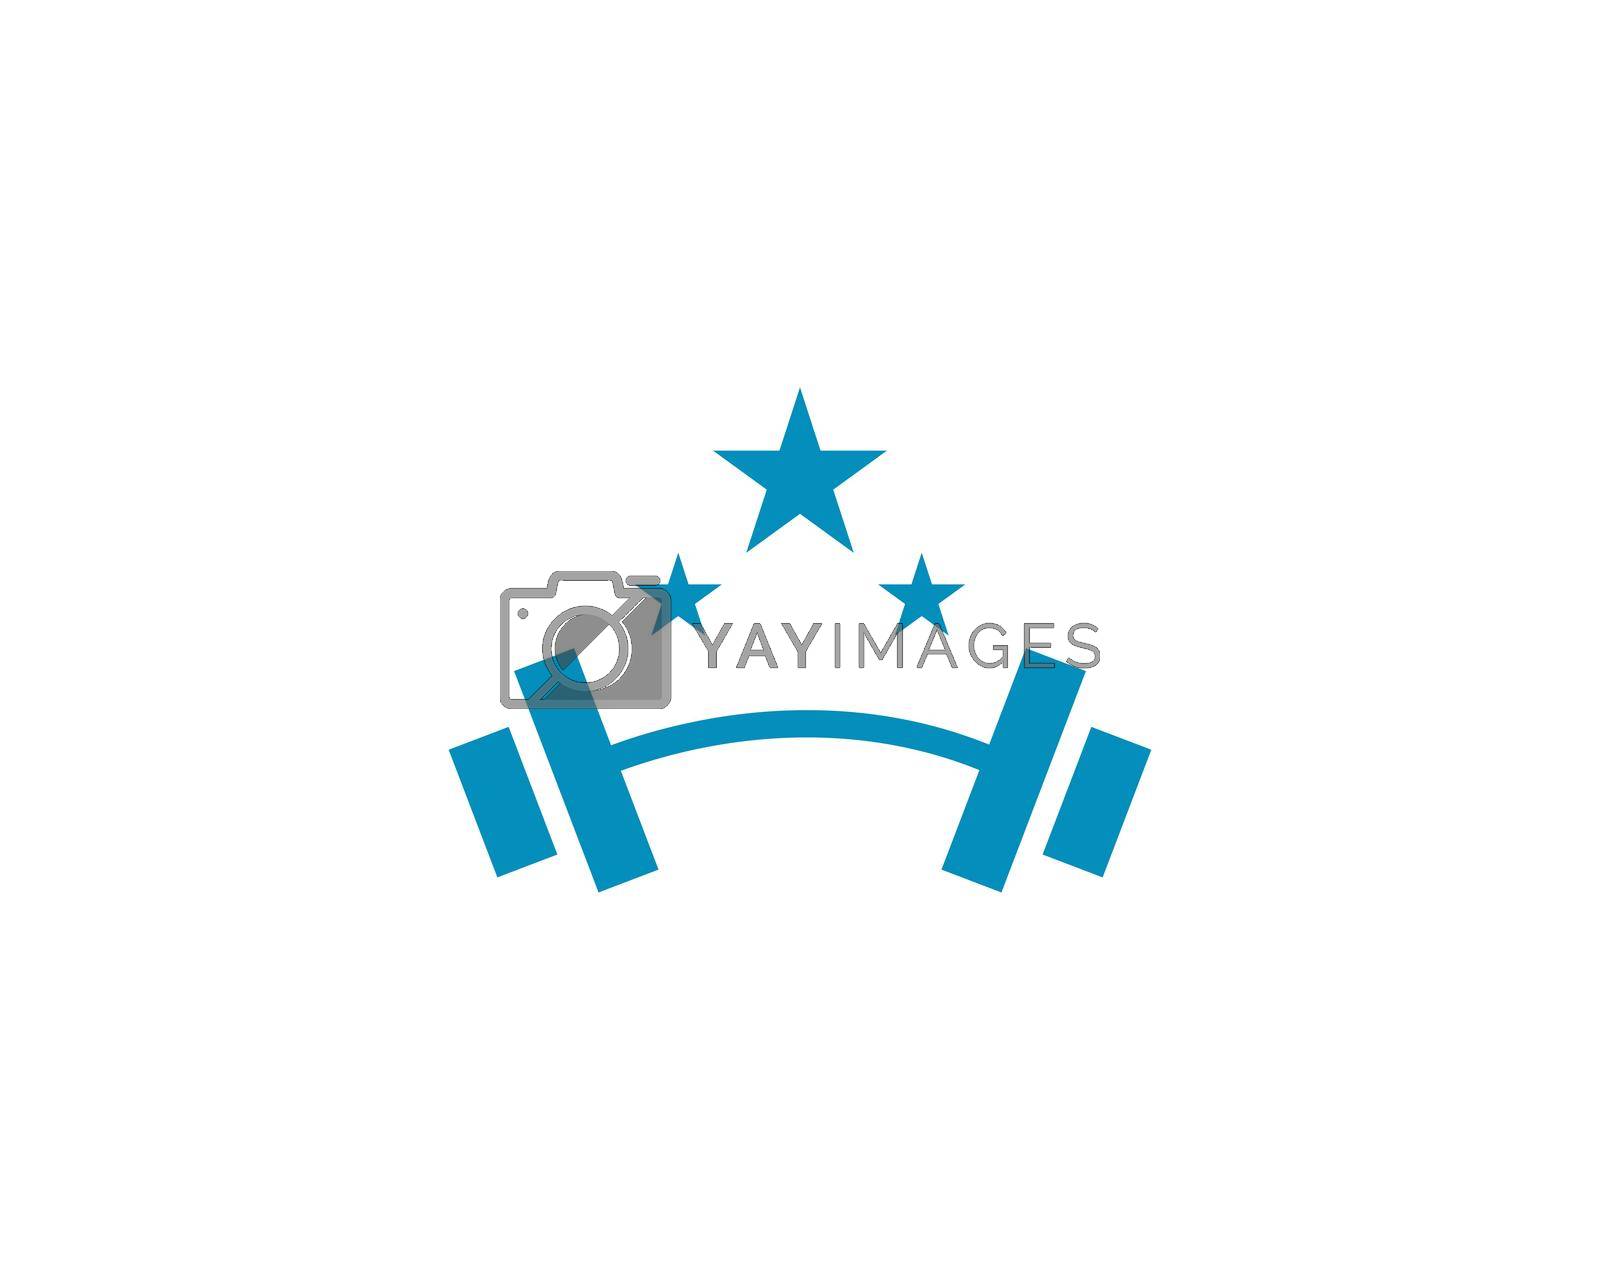 Royalty free image of Gym logo vector by awk